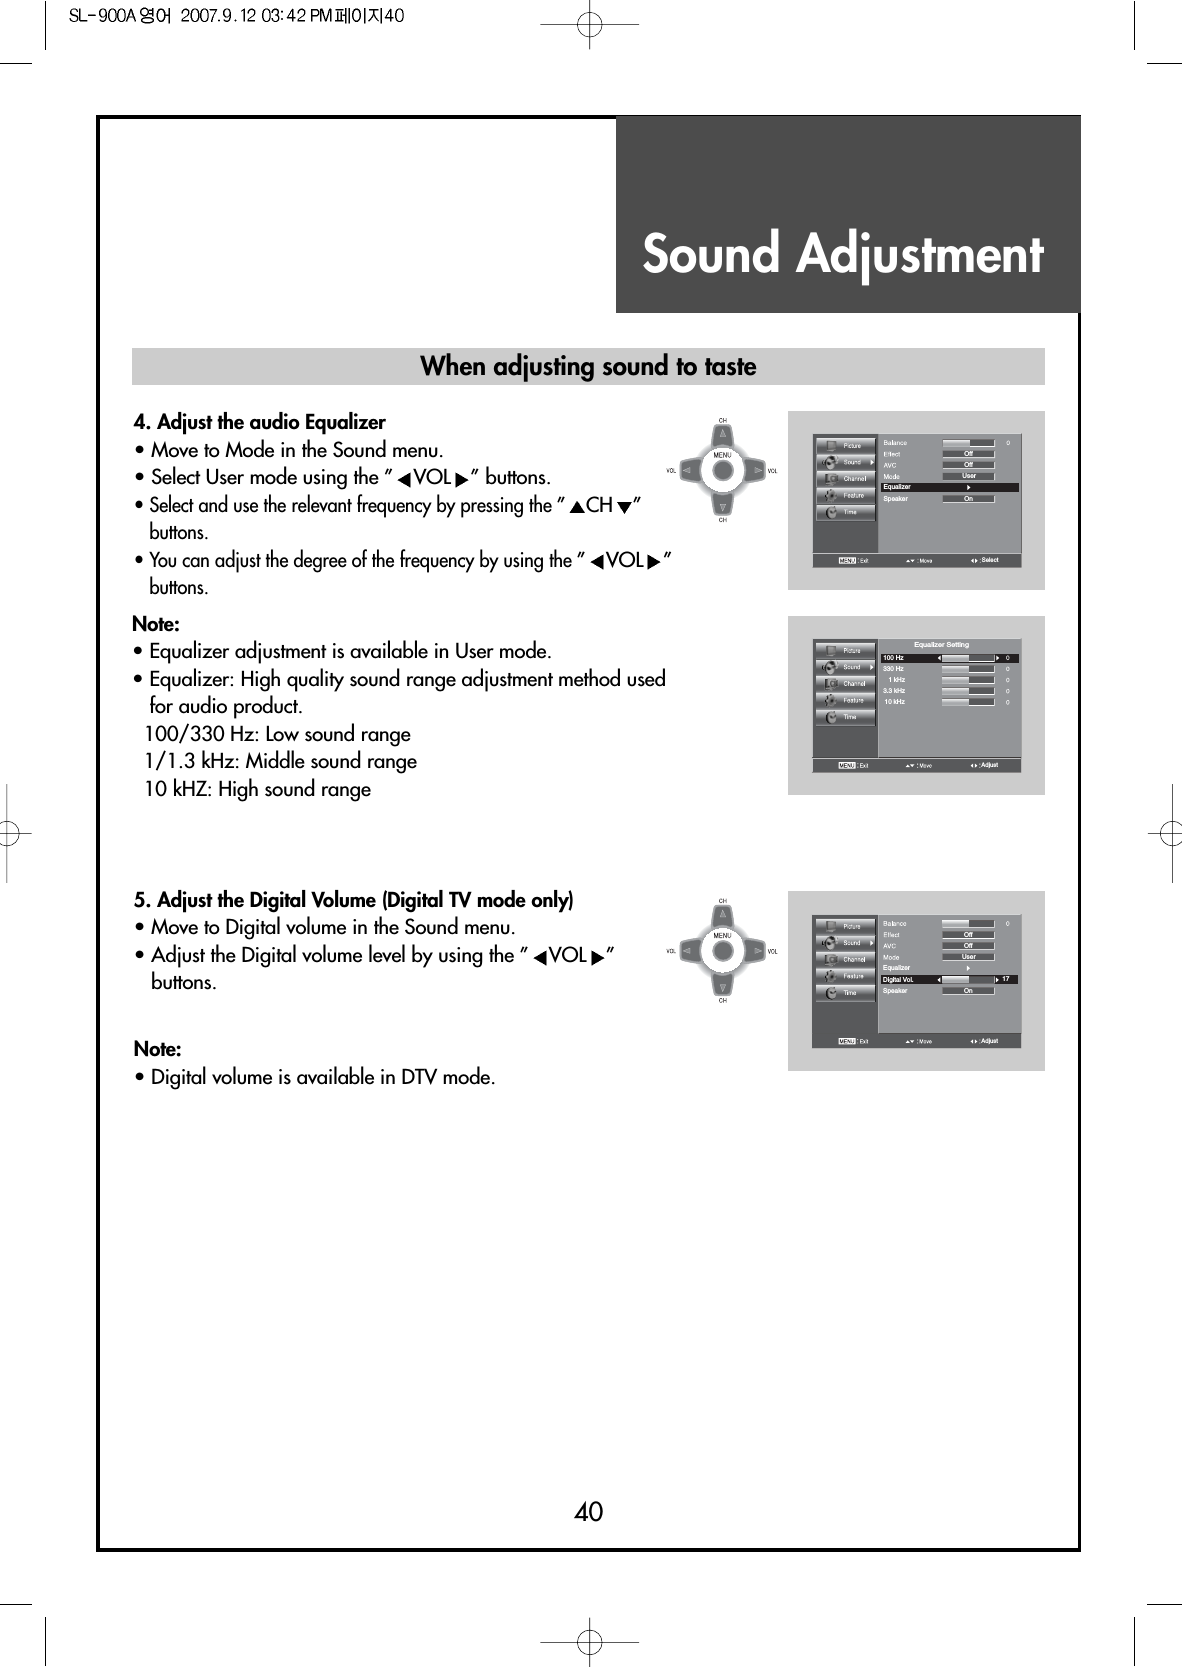 Sound Adjustment40When adjusting sound to taste4. Adjust the audio Equalizer                                  • Move to Mode in the Sound menu.• Select User mode using the ” VOL ” buttons.• Select and use the relevant frequency by pressing the ”CH ”buttons.• You can adjust the degree of the frequency by using the ”VOL ”buttons.5. Adjust the Digital Volume (Digital TV mode only)              • Move to Digital volume in the Sound menu.• Adjust the Digital volume level by using the ” VOL ”buttons. Note:• Equalizer adjustment is available in User mode.• Equalizer: High quality sound range adjustment method usedfor audio product.100/330 Hz: Low sound range1/1.3 kHz: Middle sound range10 kHZ: High sound rangeNote:• Digital volume is available in DTV mode.AdjustEqualizer17OffUserDigital Vol.OnSpeakerOffSelectEqualizerOnOffUserSpeakerOffAdjust100 Hz330 Hz1 kHz3.3 kHz10 kHzEqualizer Setting